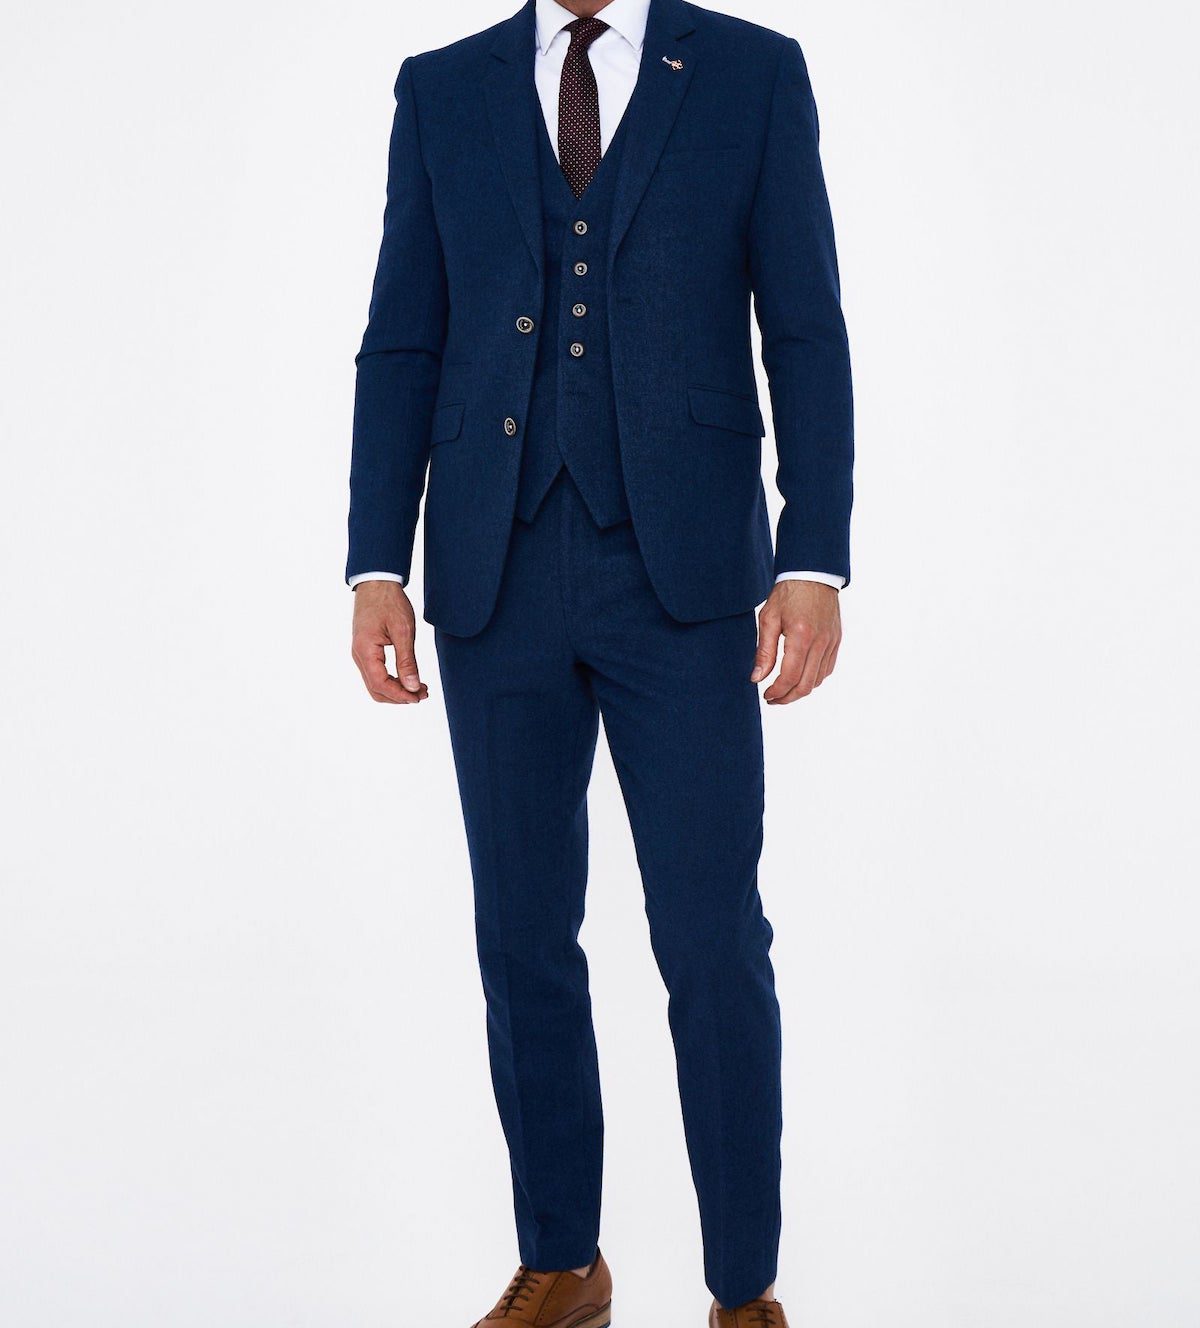 Model stood in navy blue three piece suit. Men's Christmas party wear